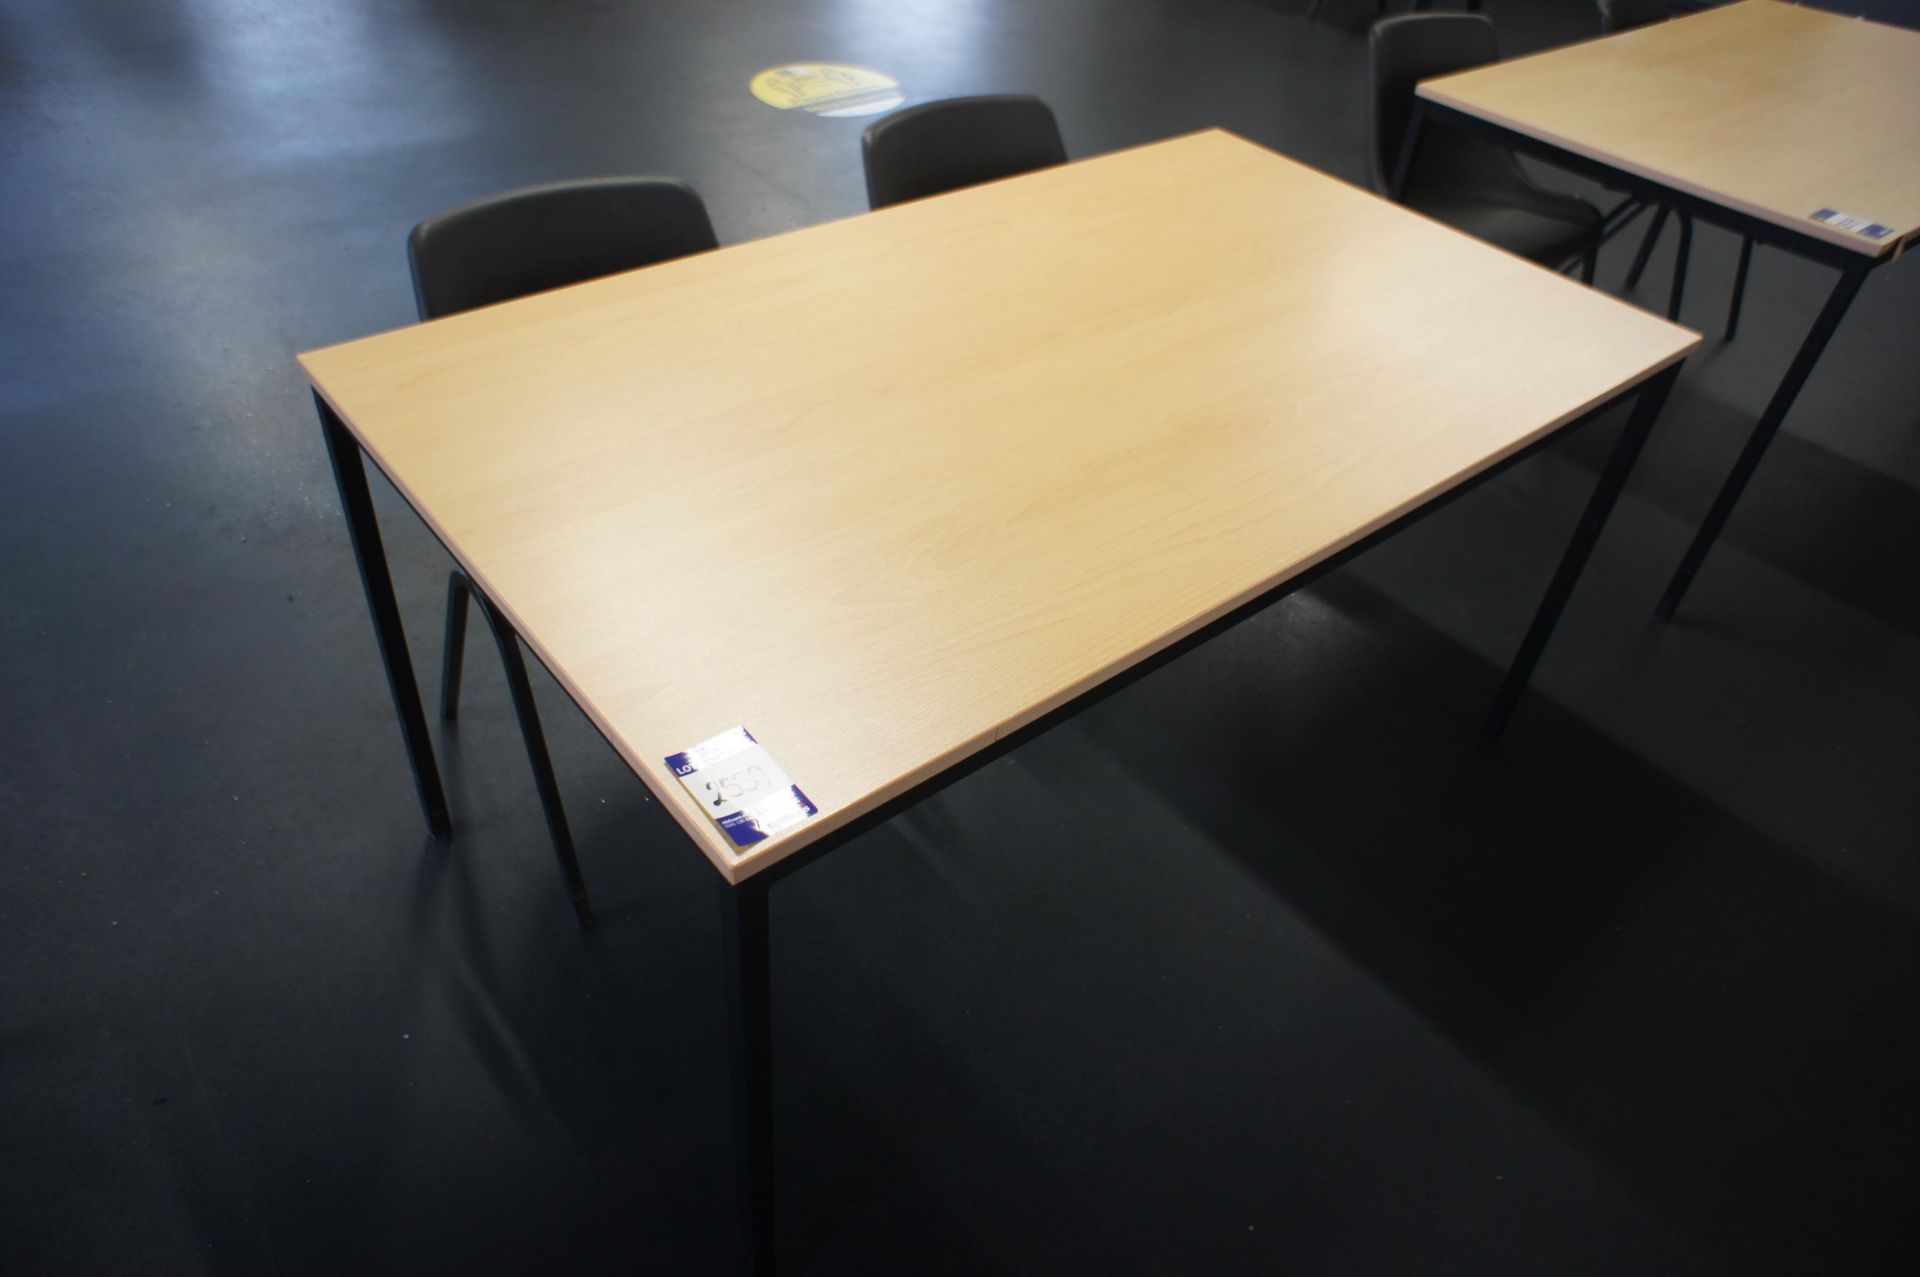 6 x Light Oak Effect Breakout Tables 1400 x 800mm with 12 Stackable Plastic Chairs - Image 2 of 3